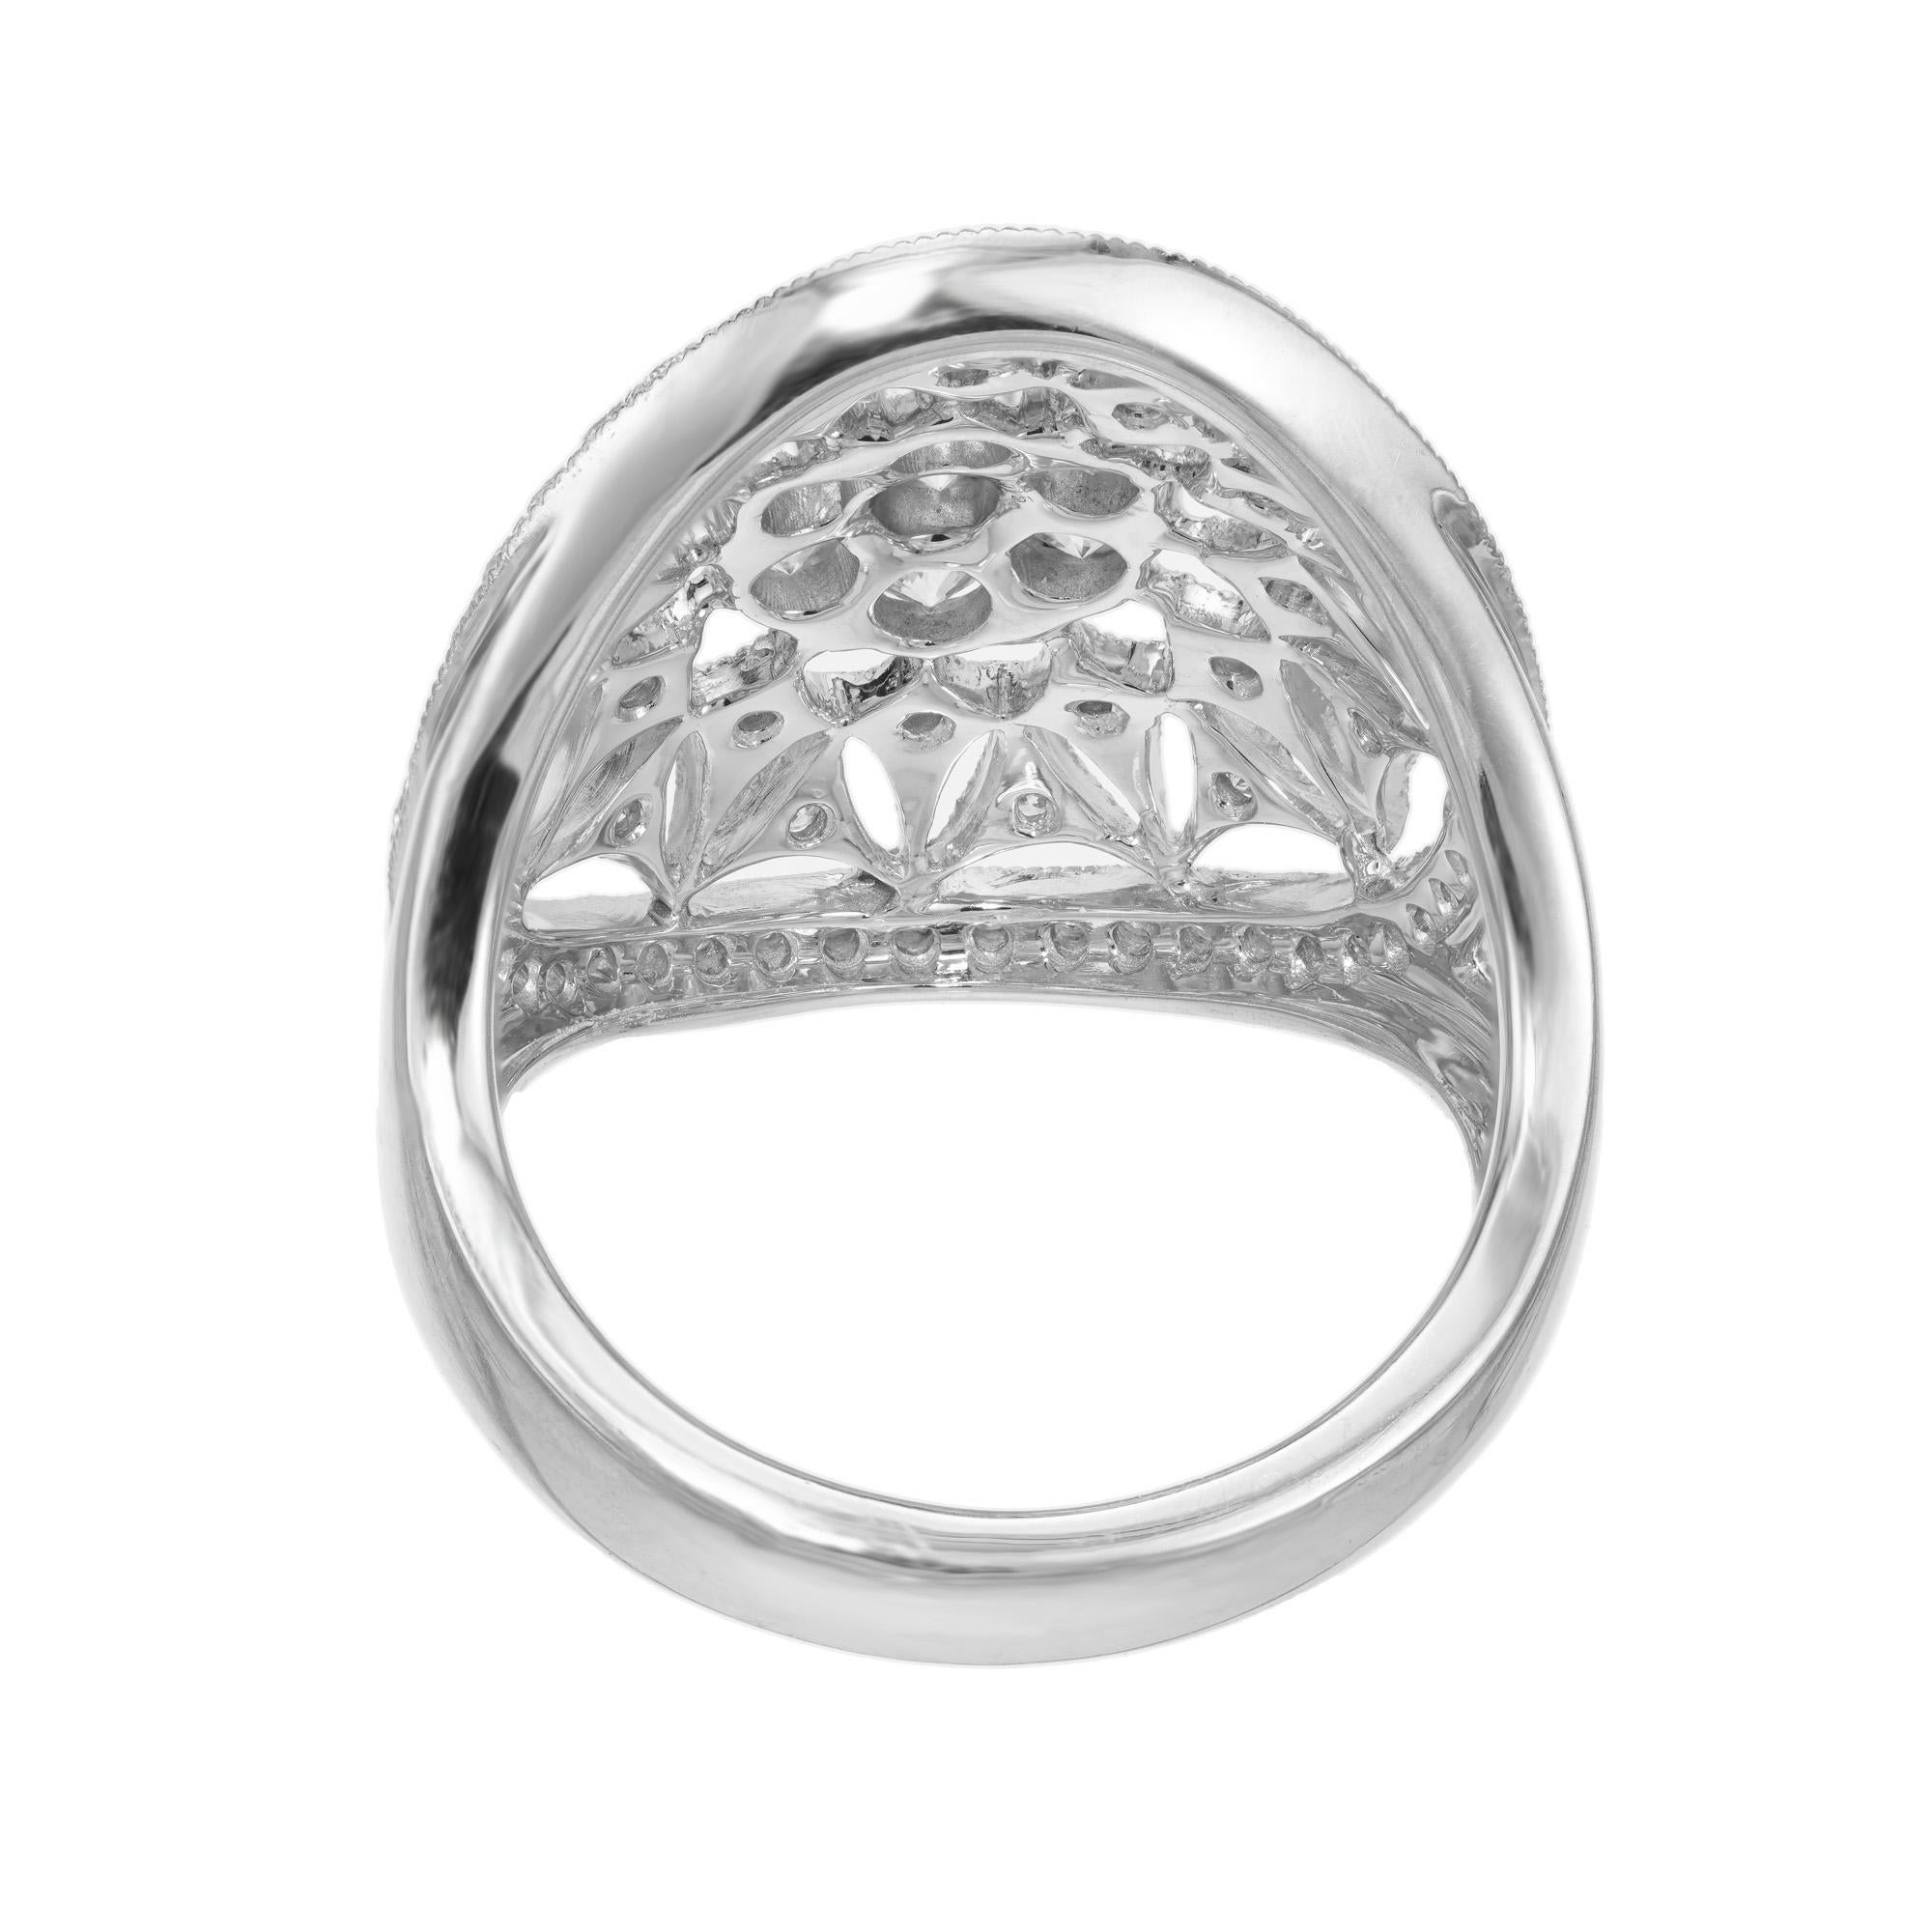 Peter Suchy 1.50 Carat Round Diamond White Gold Domed Cocktail Ring For Sale 2